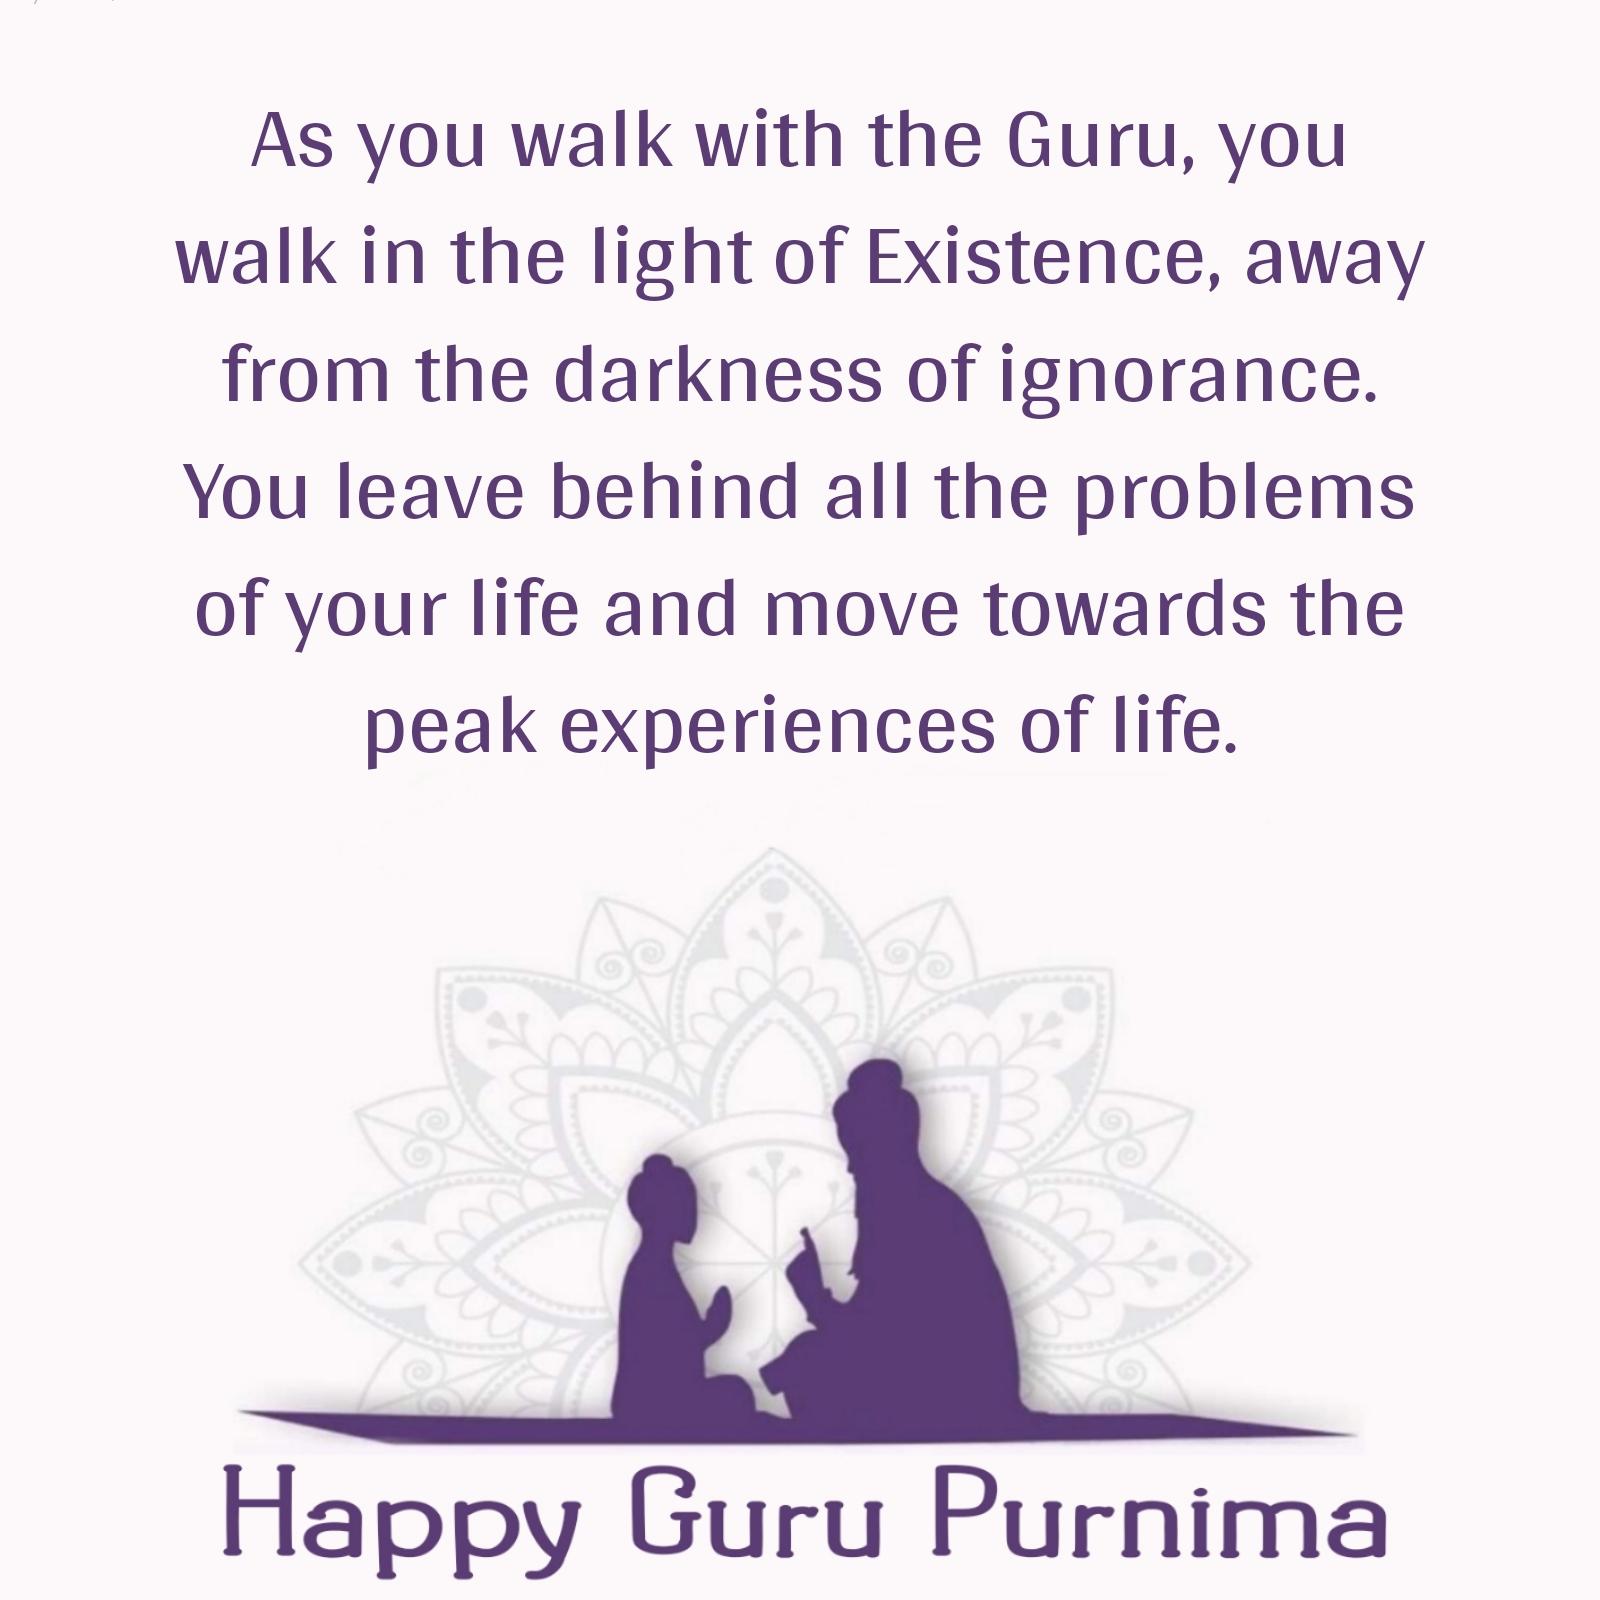 As you walk with the Guru you walk in the light of Existence